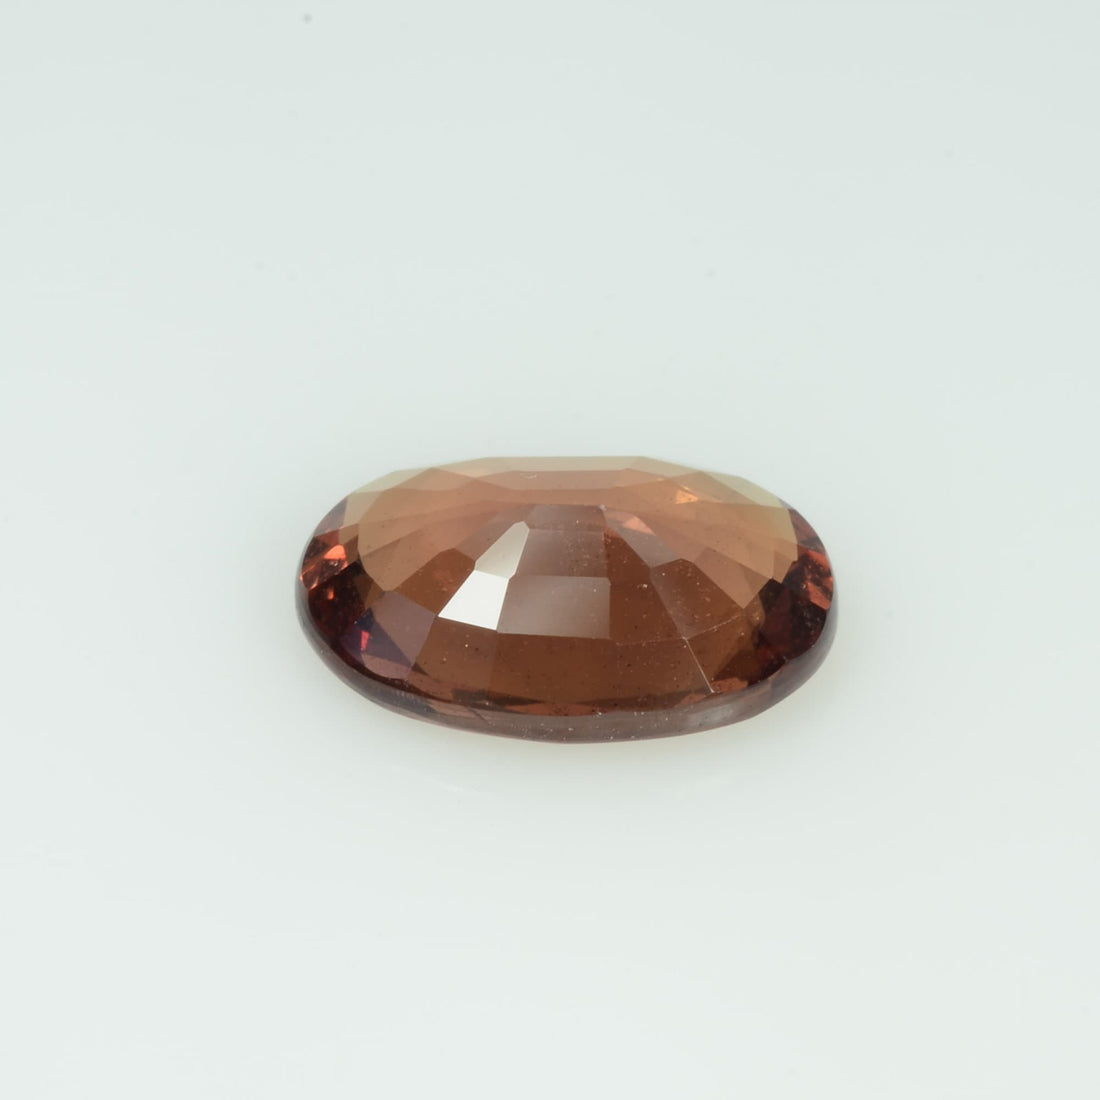 2.57 cts Natural Orange Sapphire Loose Gemstone Oval Cut Certified